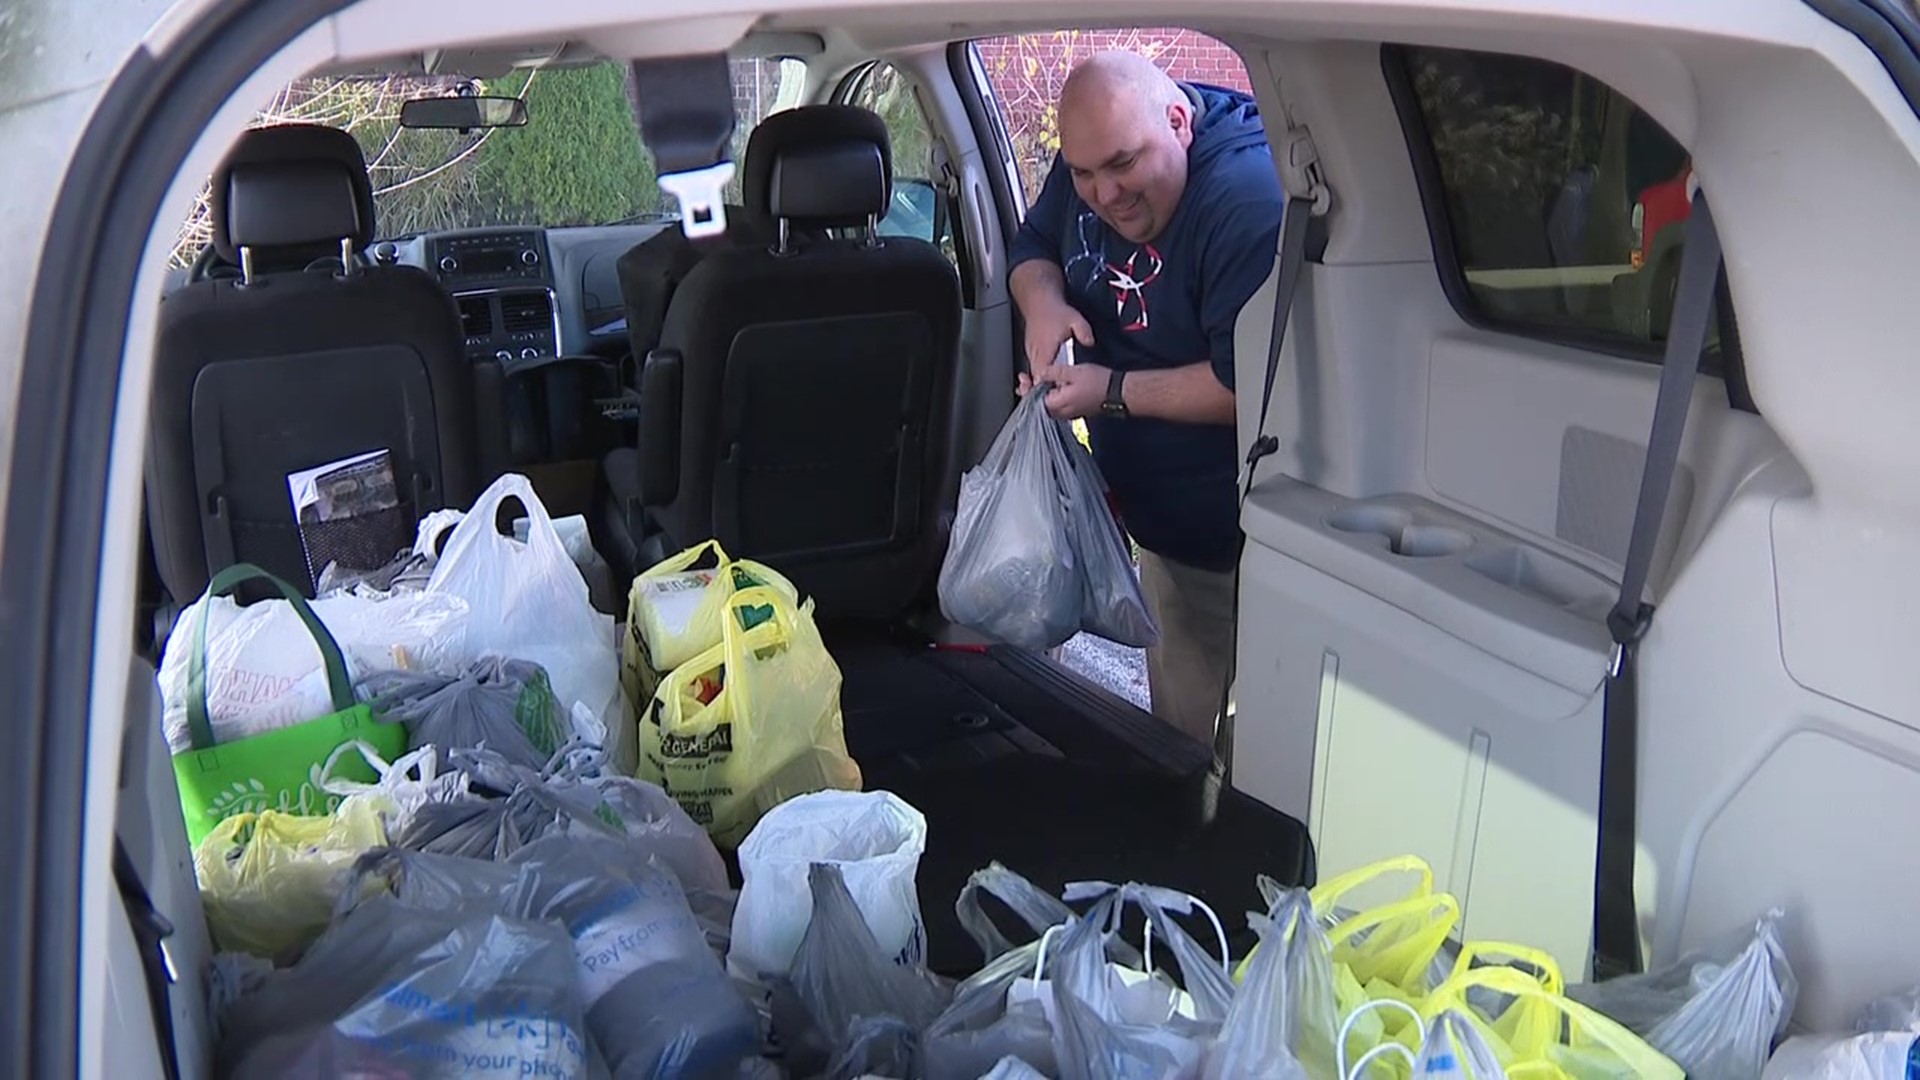 People were invited to "Cram the Van" in Northumberland County on Monday to help veterans in our area.